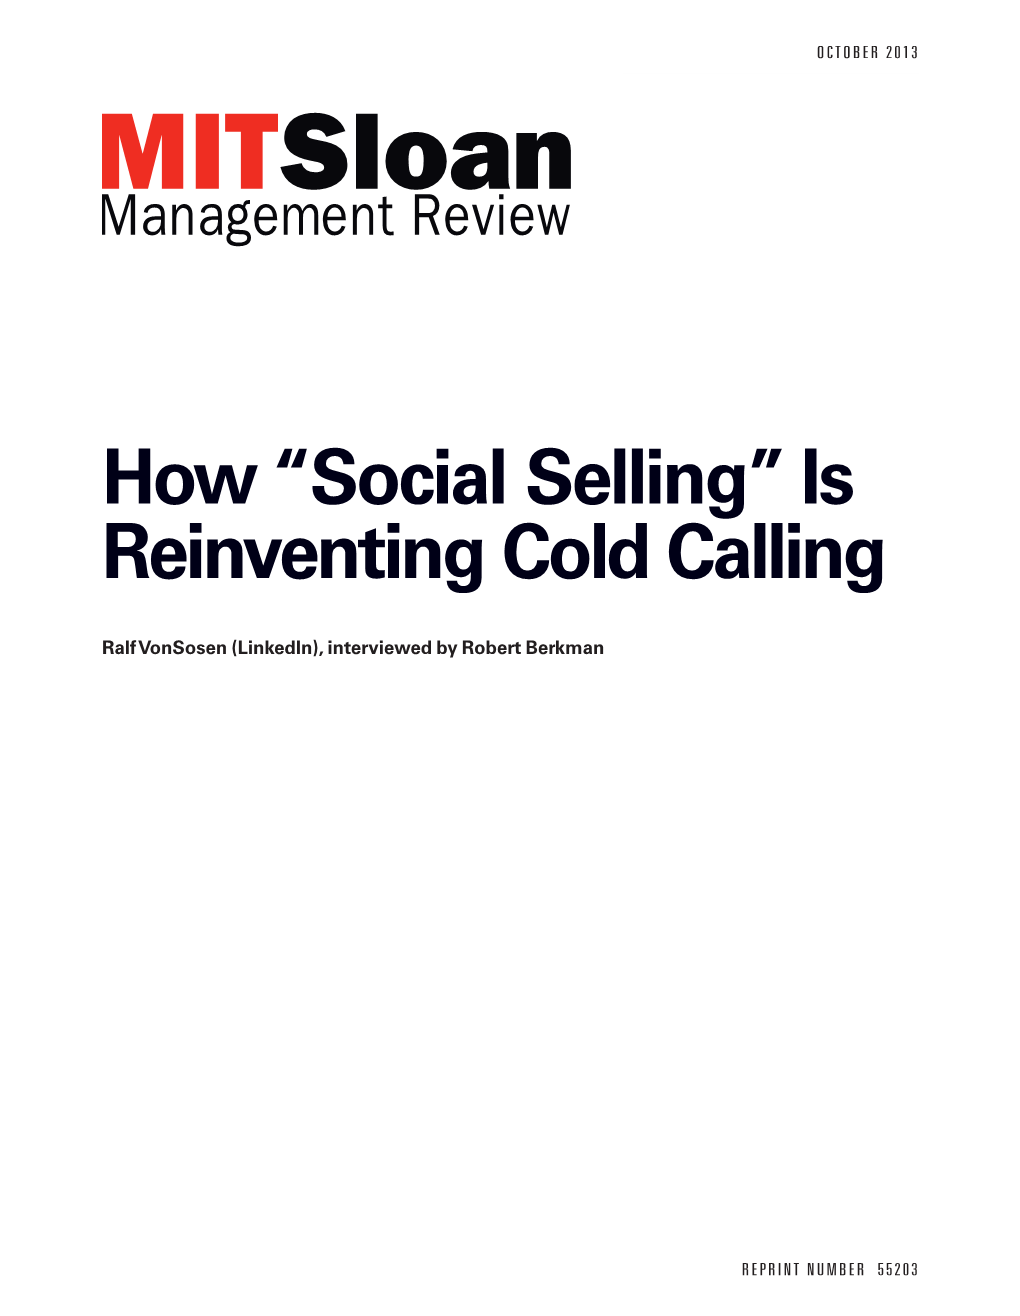 How “Social Selling” Is Reinventing Cold Calling